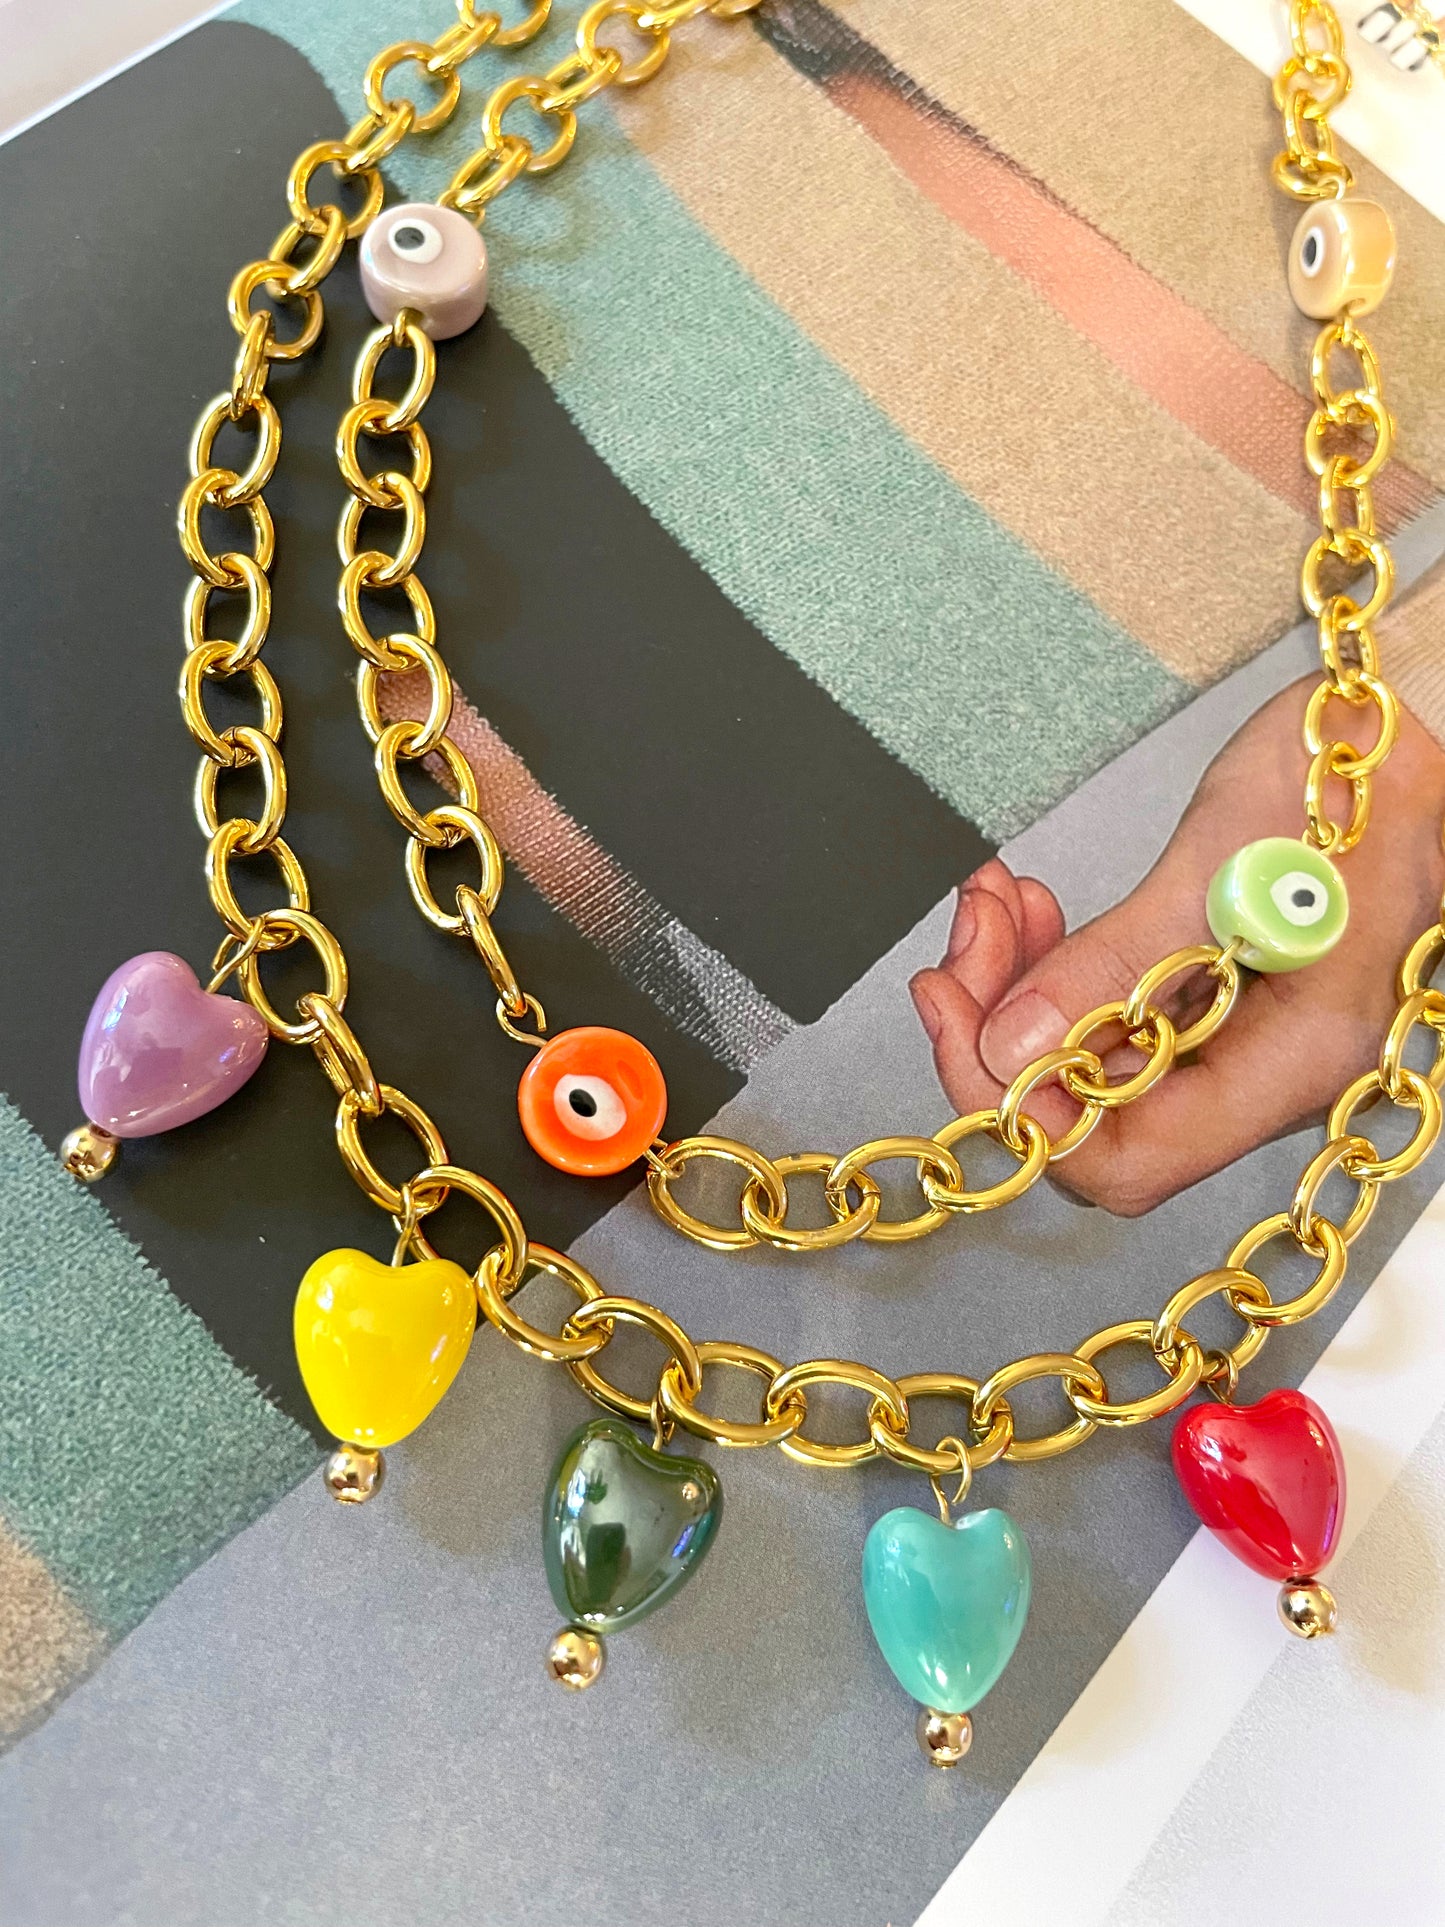 Ceramic charms style necklaces